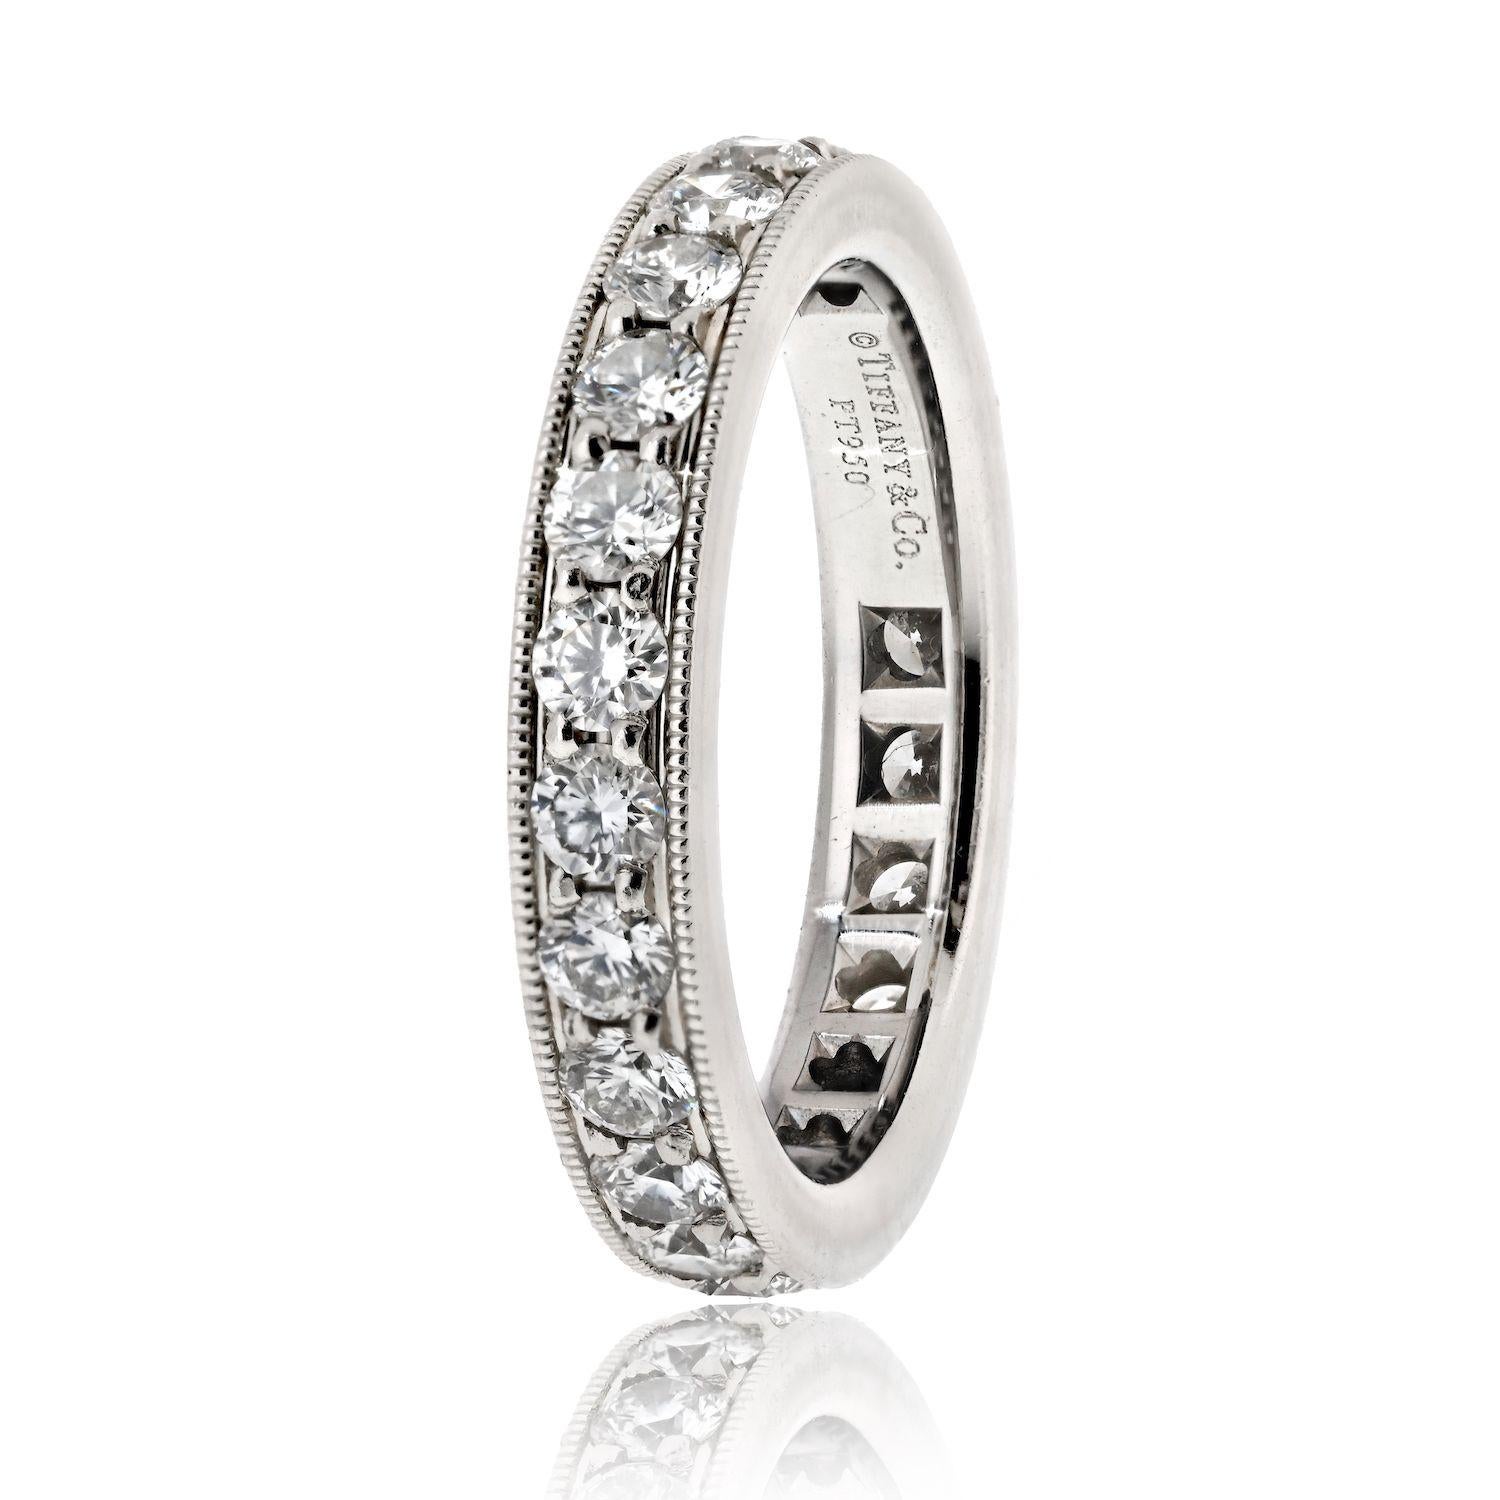 Elevate your love story with the timeless elegance of an Estate Tiffany & Co. Legacy Platinum 1.50cttw Round Diamond Ring, a symbol of enduring commitment and unmatched beauty. With a size 6 fit and 3.4mm in width, this exquisite piece is more than